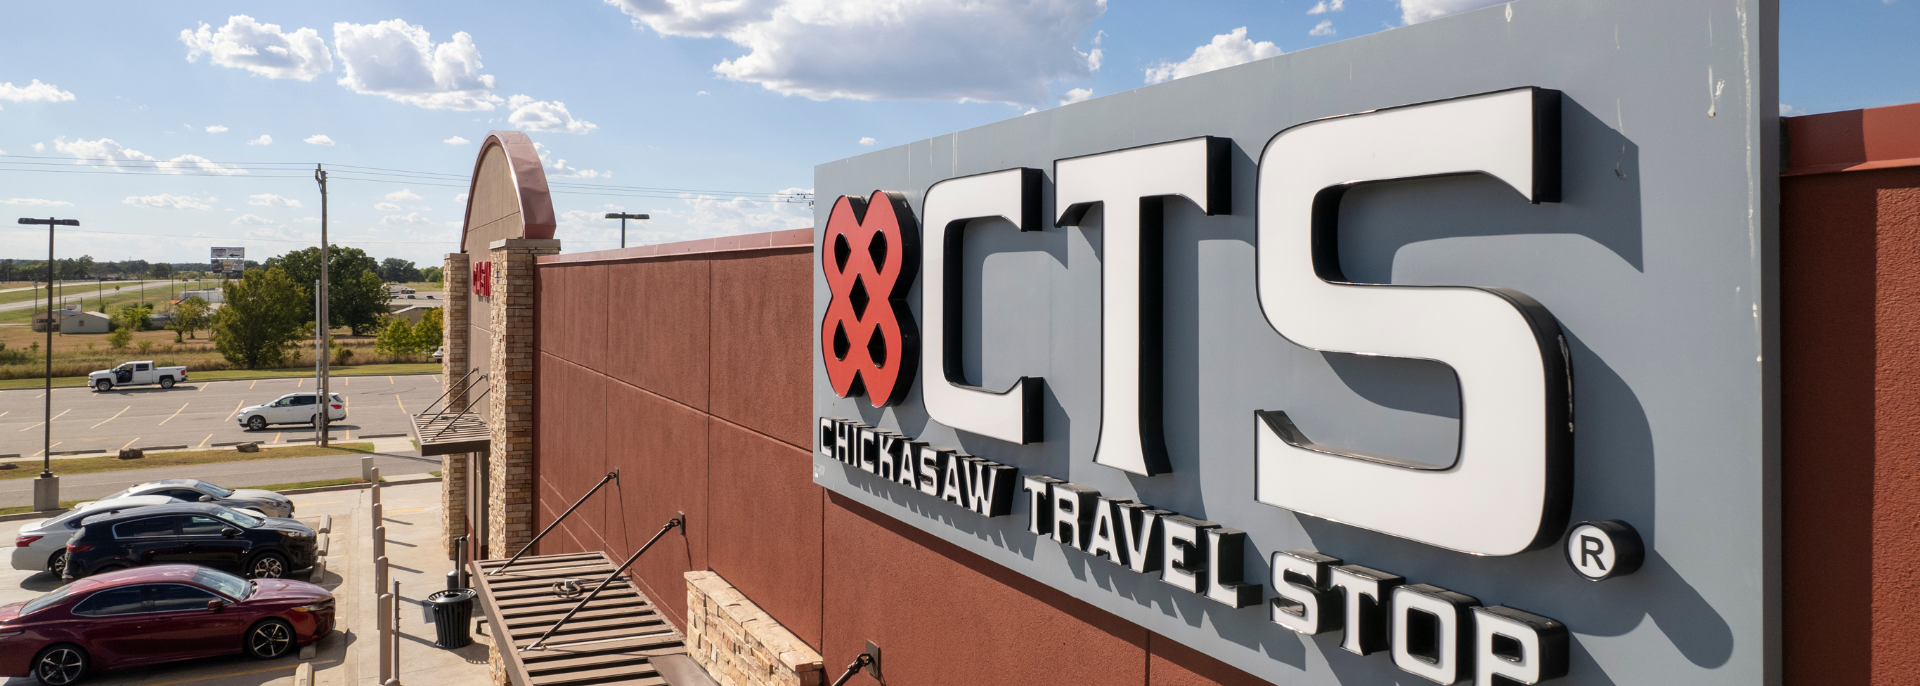 cts chickasaw travel stop